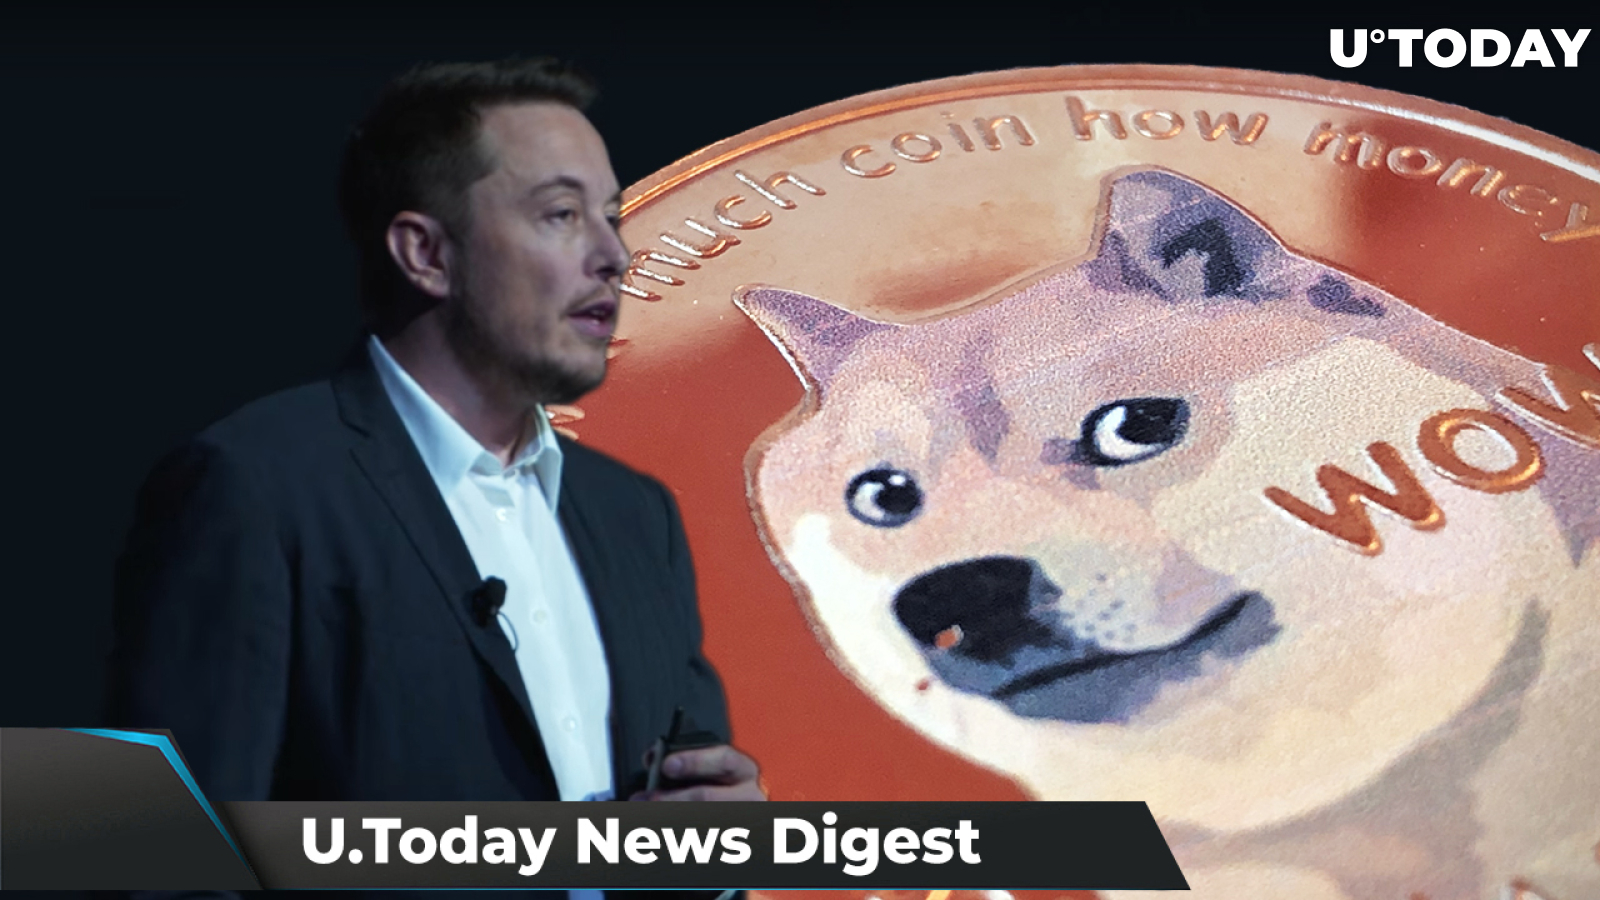 Musk Named New Fake Board Chairman of Dogecoin, SHIB Network Activity Drops, SHIB Amazon Petitions Gain 173,373 signatures: Crypto News Digest by U.Today